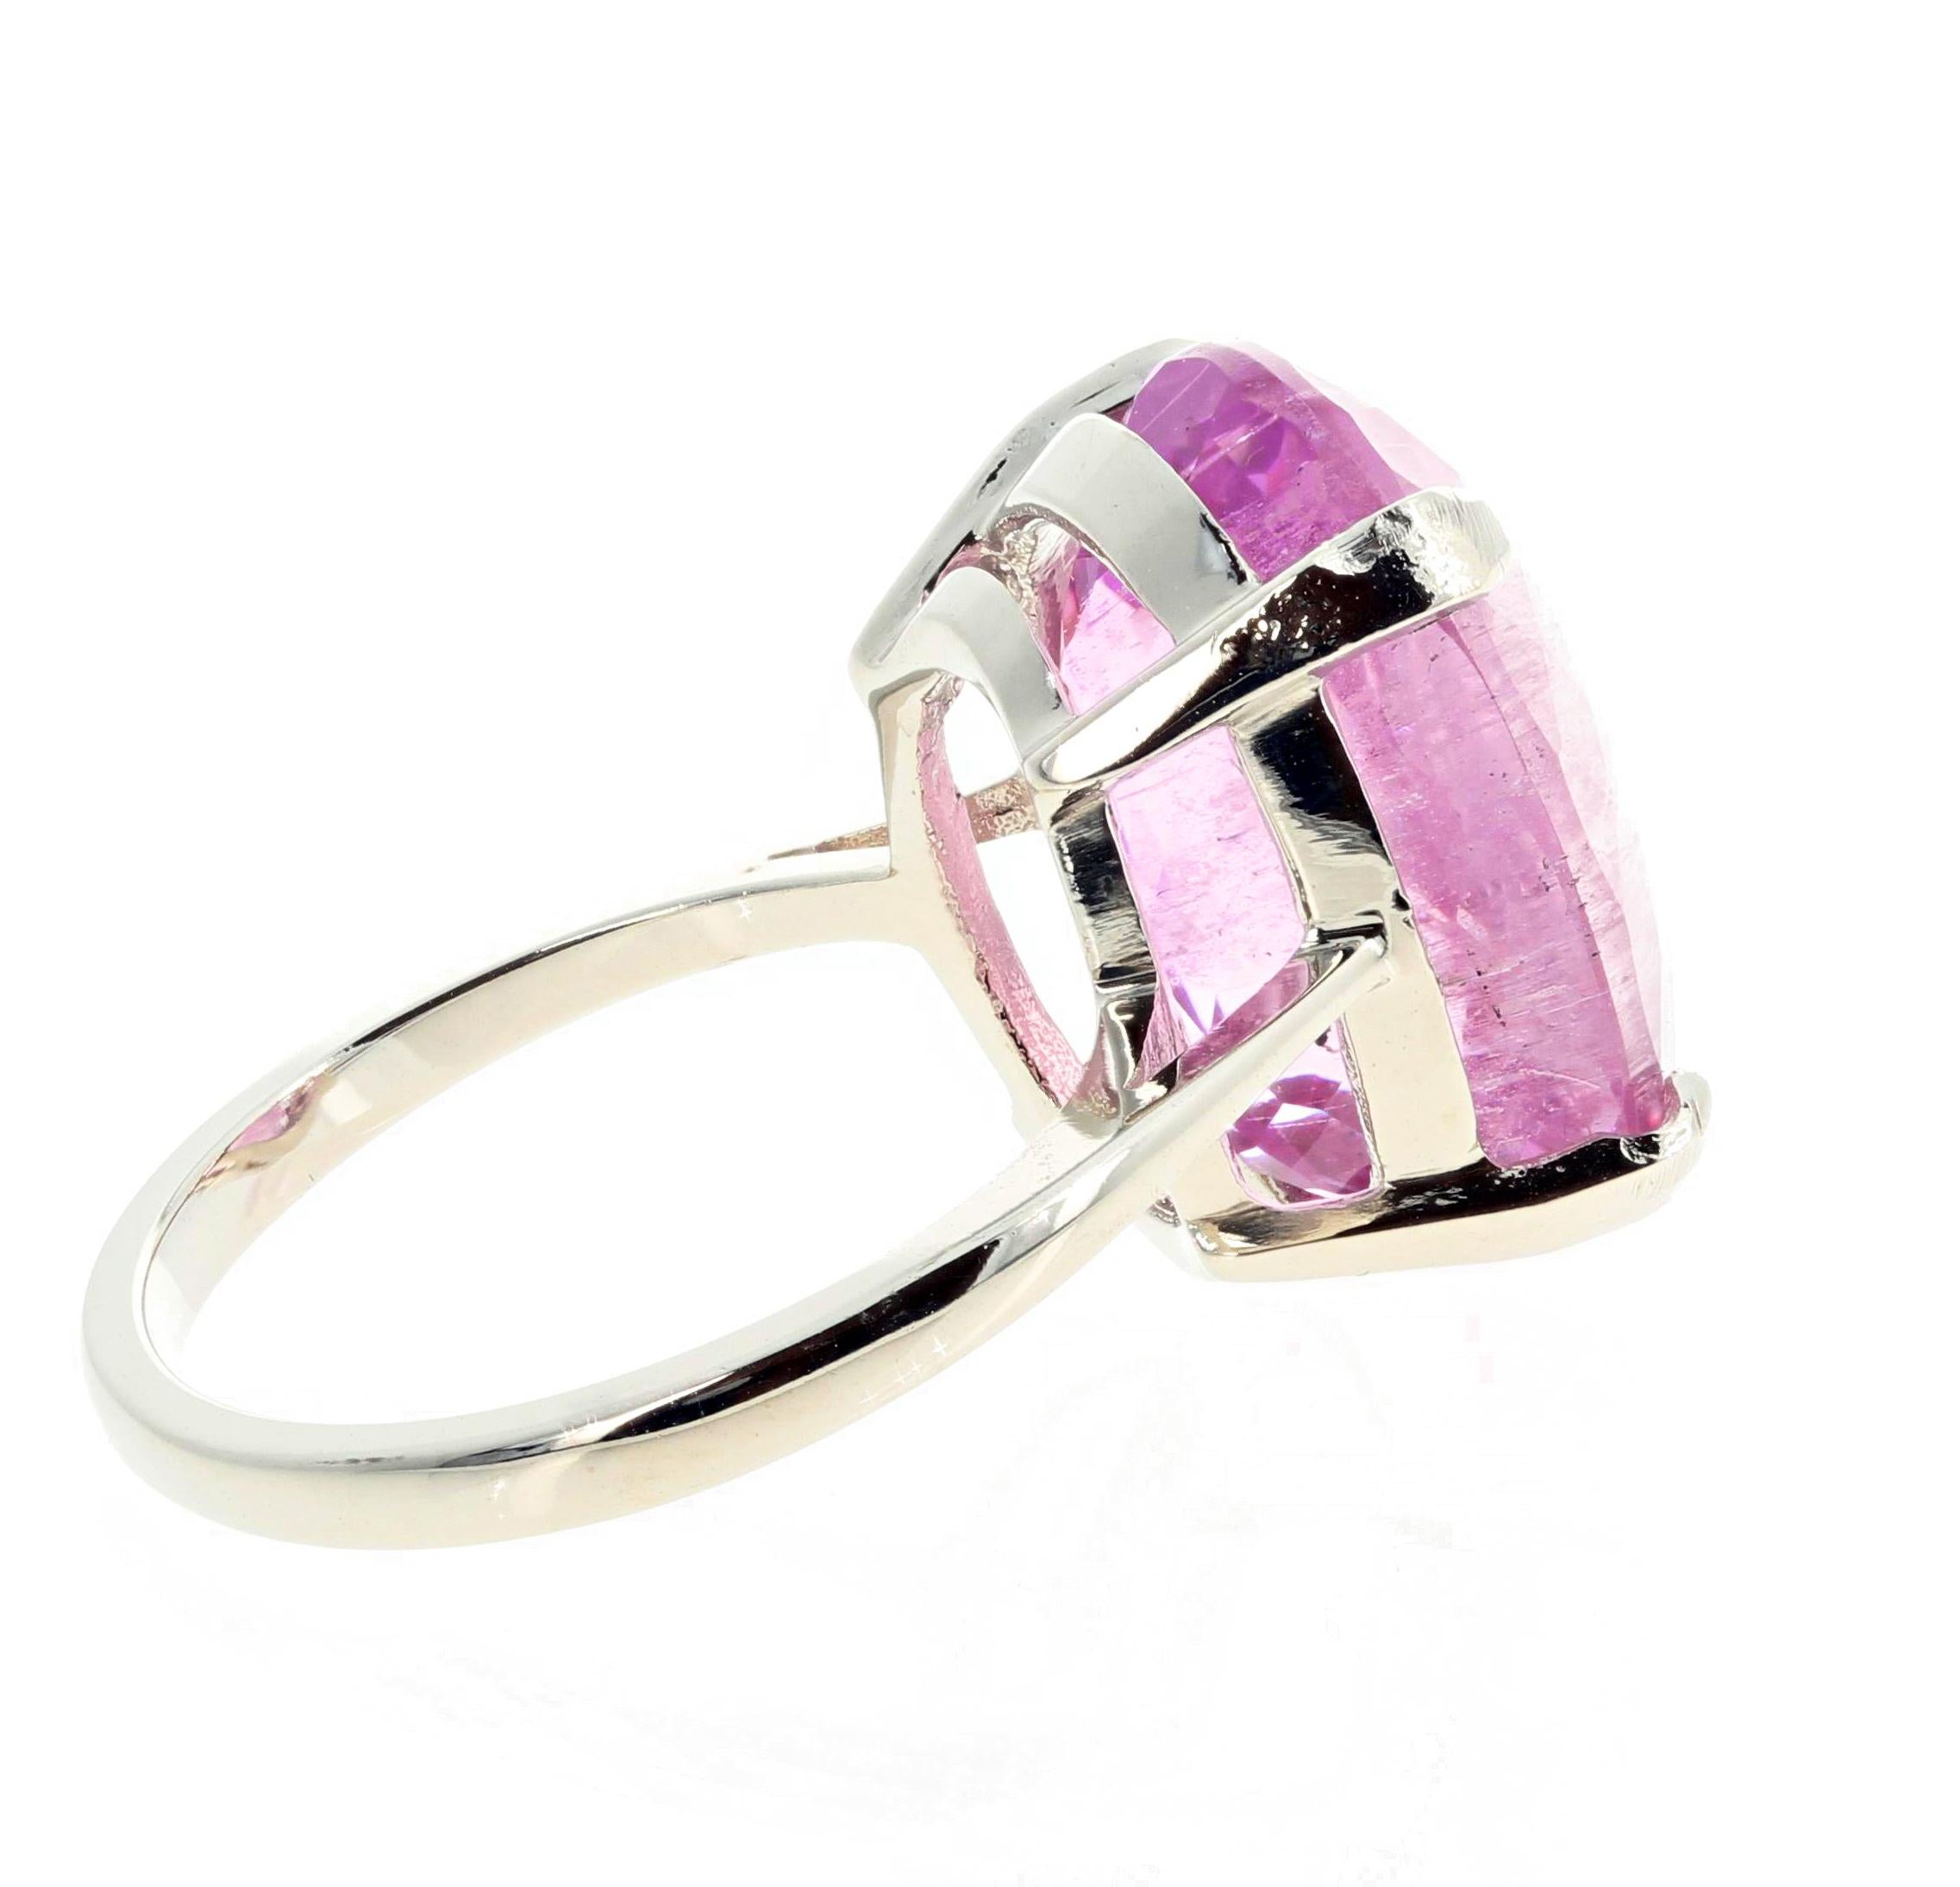 AJD Extraordinarily Rare Clear 14.16Ct PinkyPurple Sparkling Kunzite Silver Ring For Sale 1